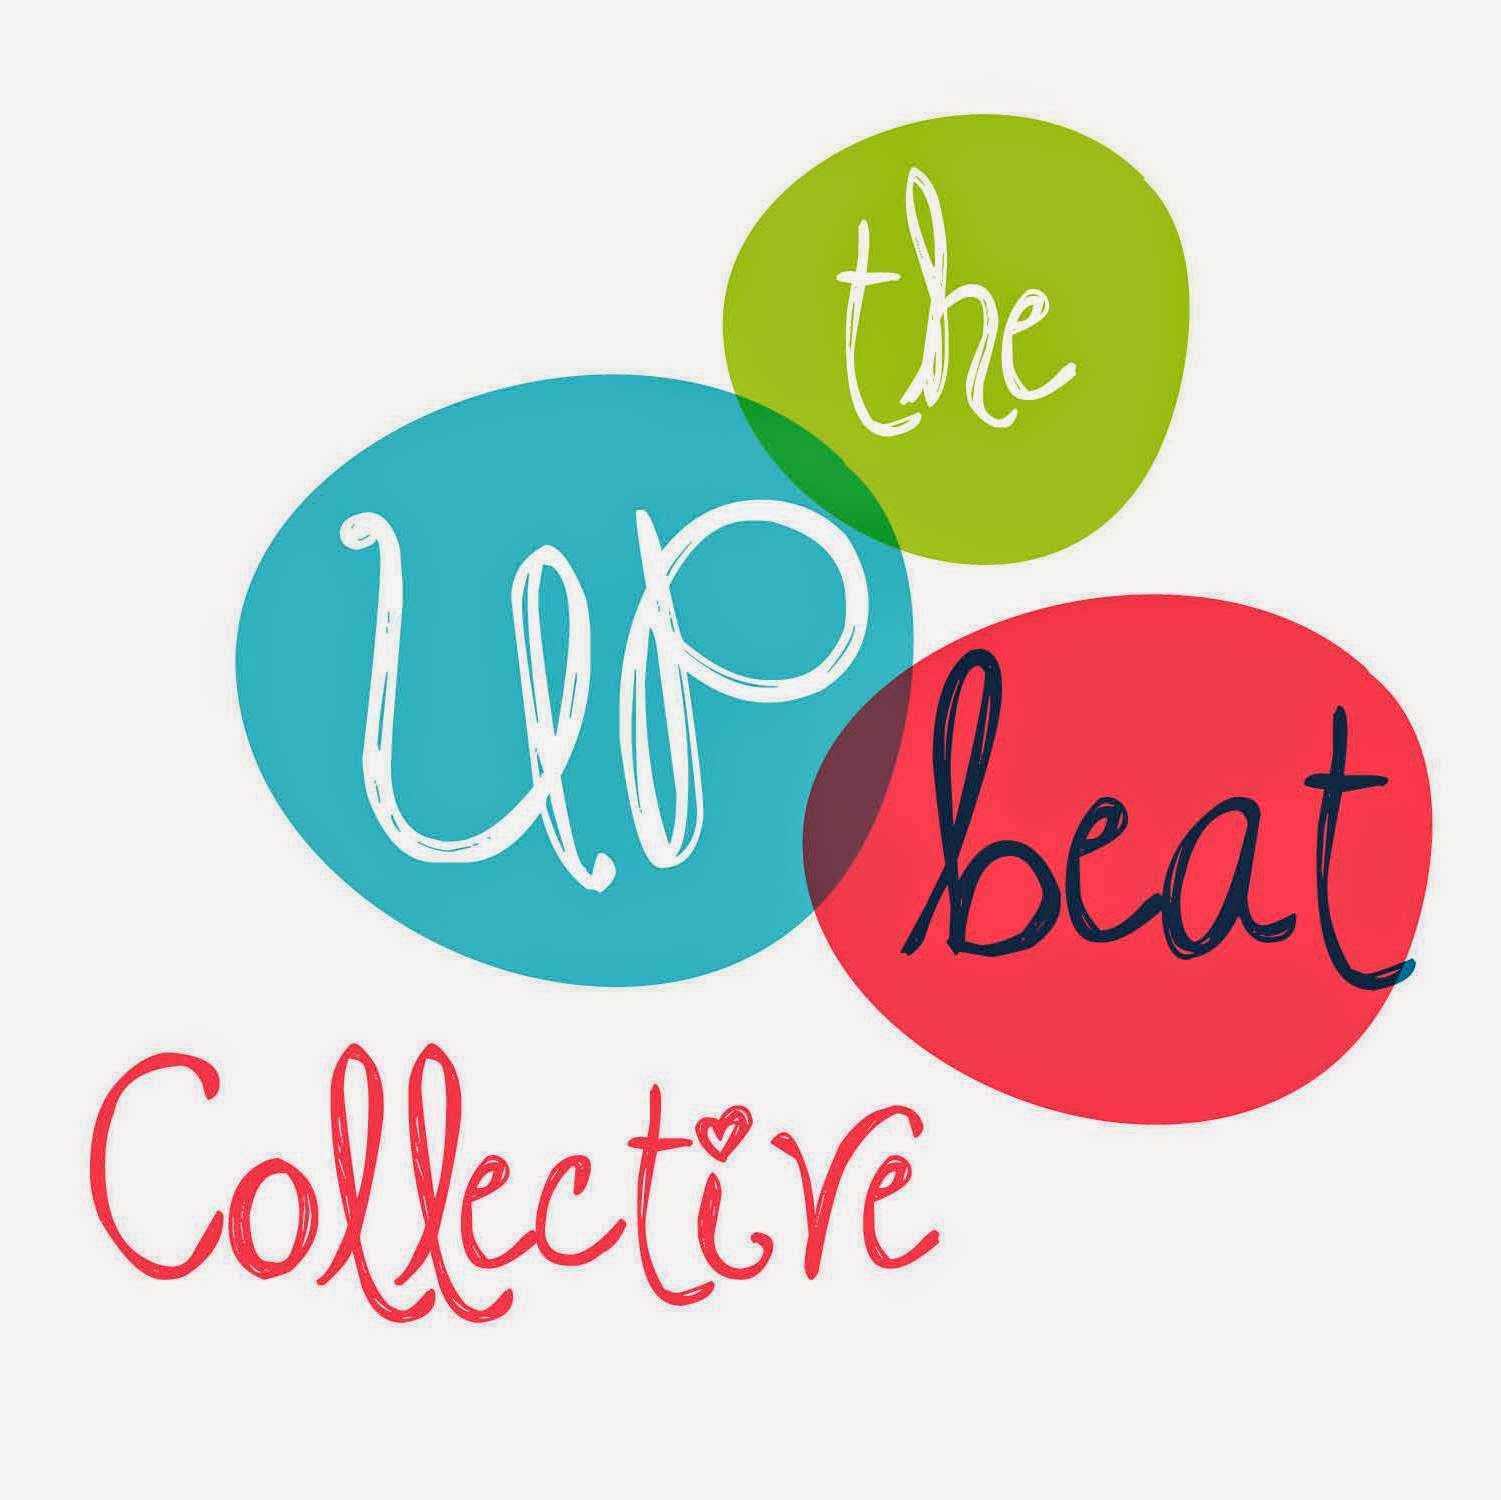 The Upbeat Collective